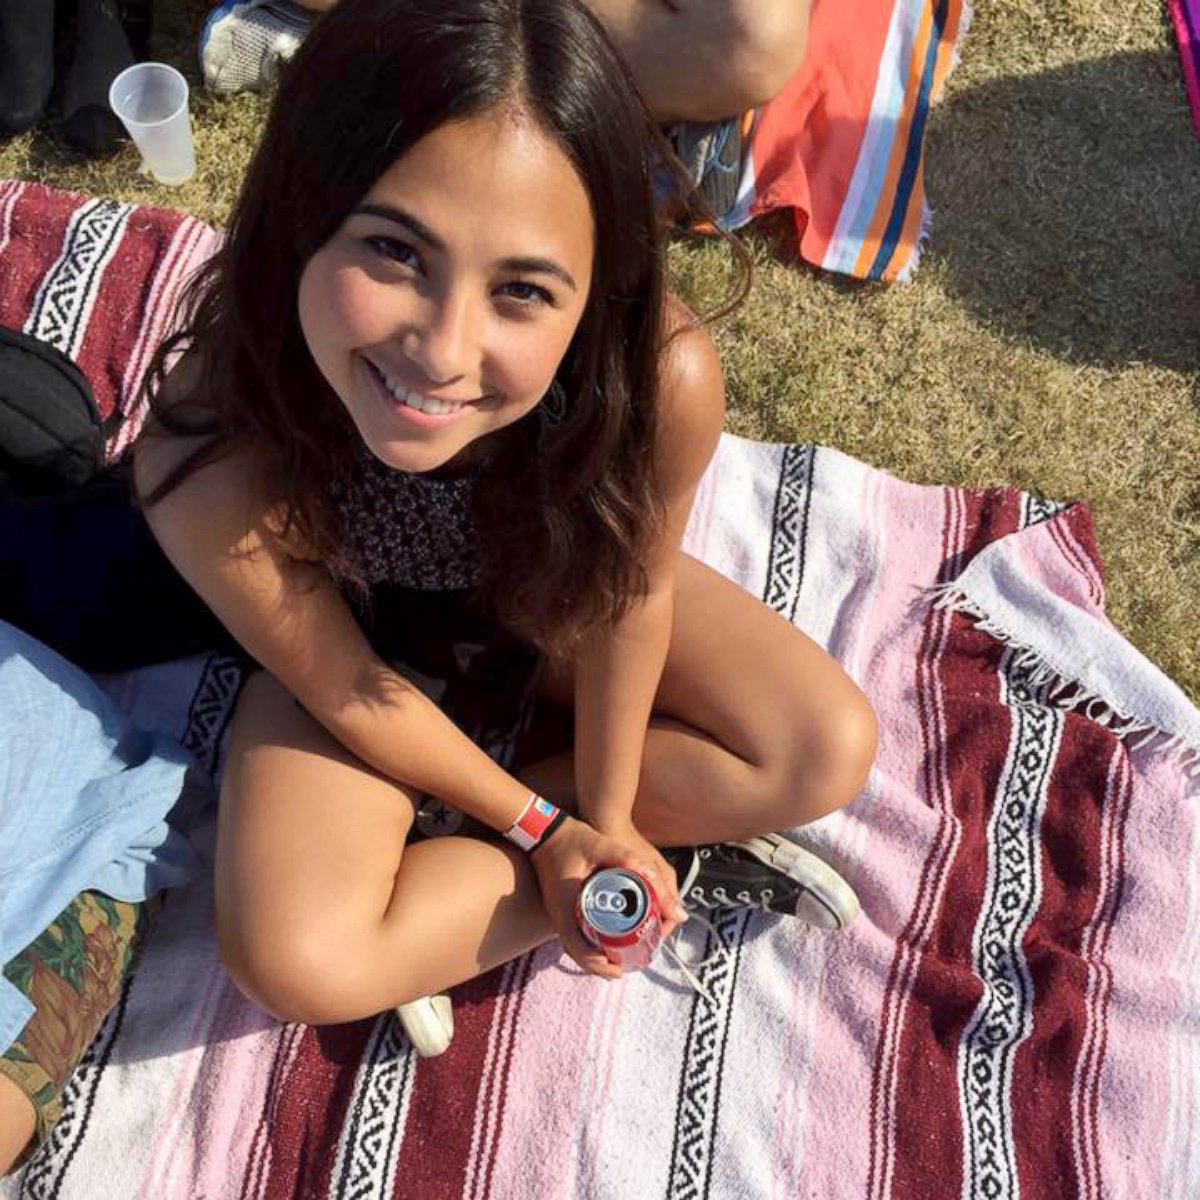 PHOTO: Haruka Weiser, seen here in this undated photo posted to her Facebook on Oct. 5, 2015, was identified as the victim of a homicide after her body was found in a creek on the University of Texas Austin campus, April 7, 2016.